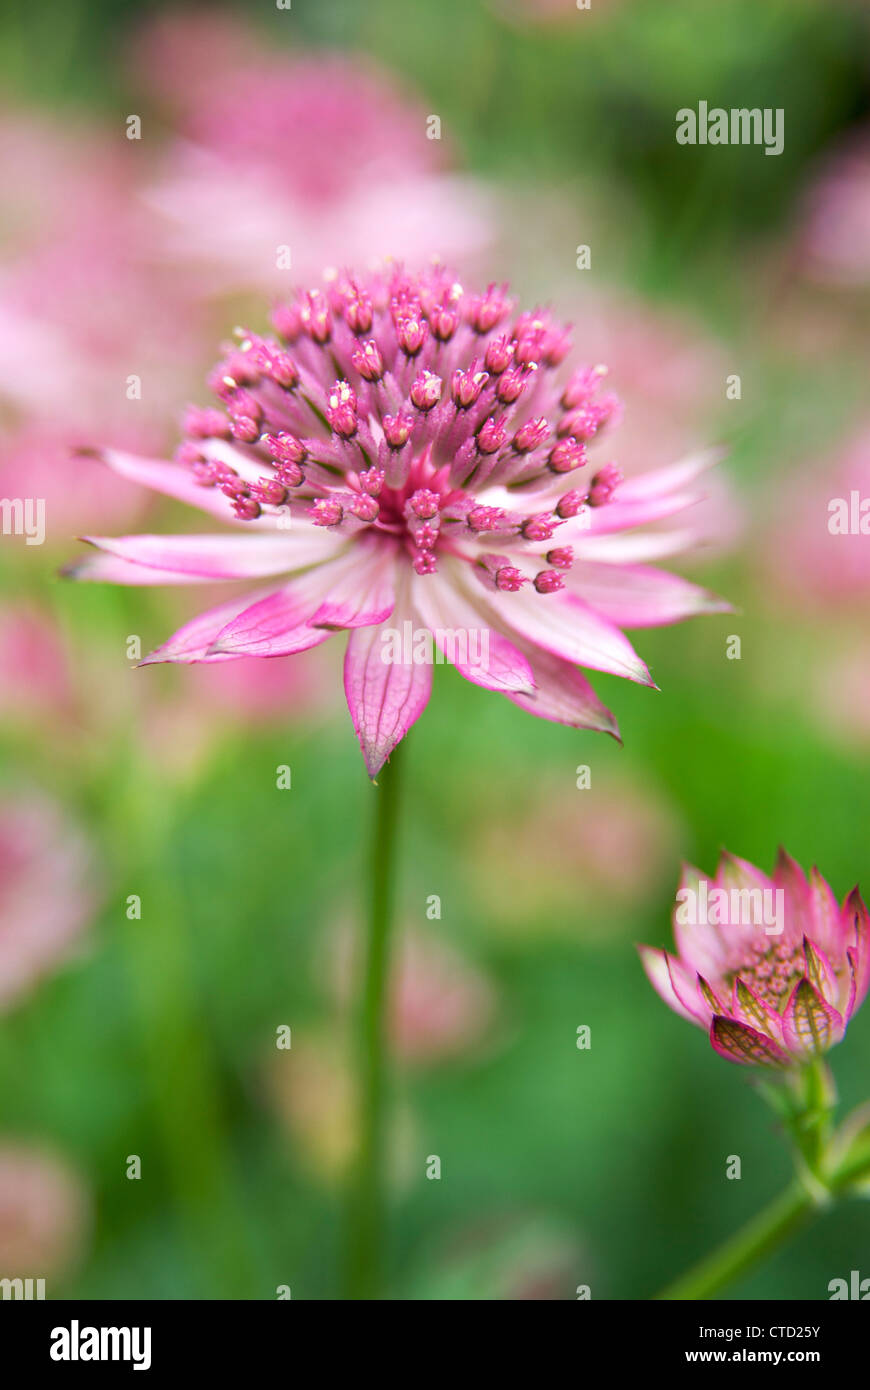 Flower head of an Astrantia major 'Roma' (Great Masterwort), a hardy plant, with a delicate appearance. Stock Photo